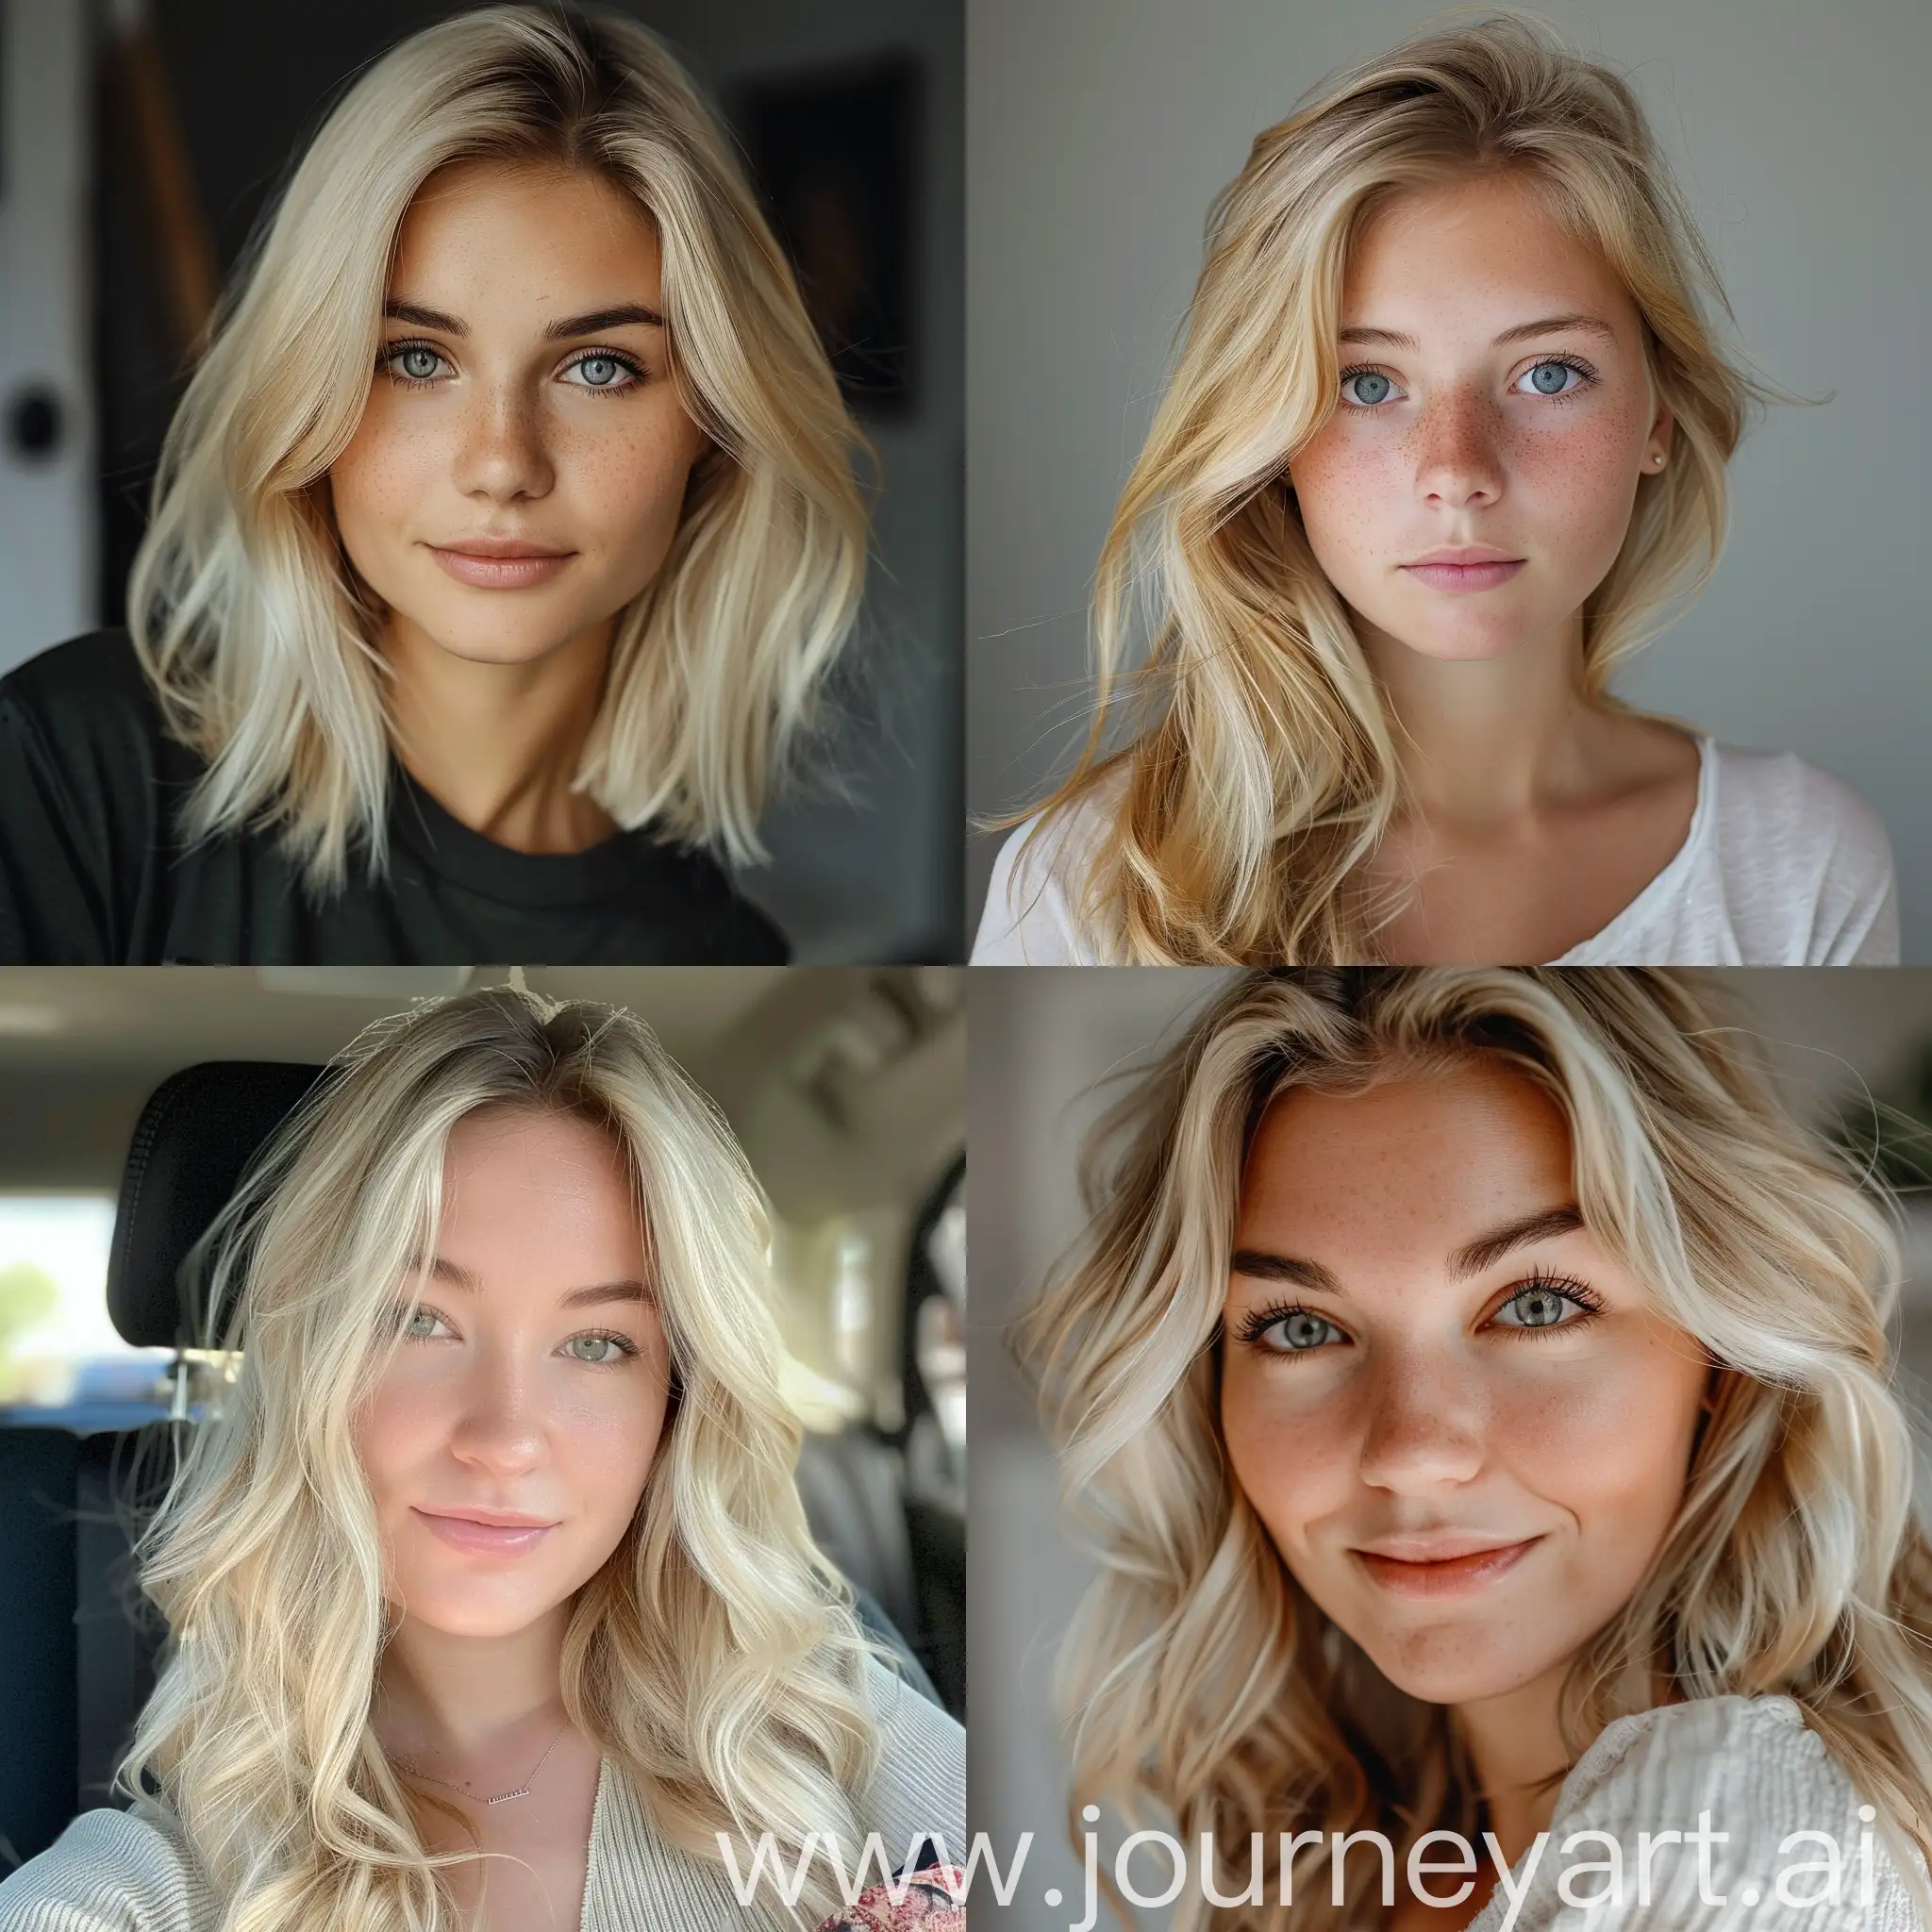 Adorable-Blonde-Girl-with-Round-Face-in-Vibrant-Health